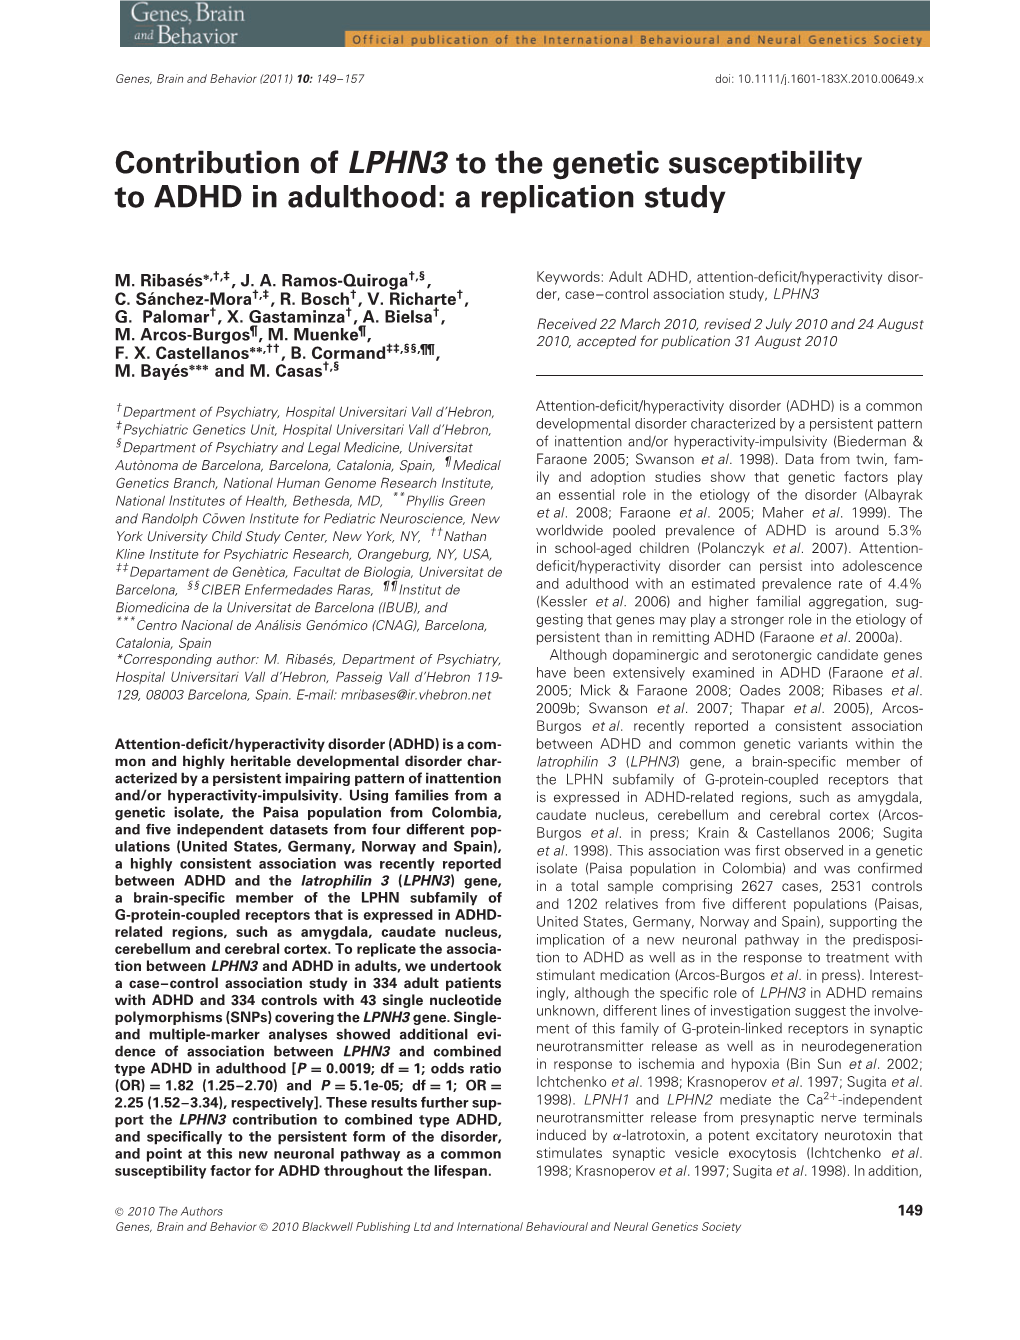 Contribution of LPHN3 to the Genetic Susceptibility to ADHD in Adulthood: a Replication Study